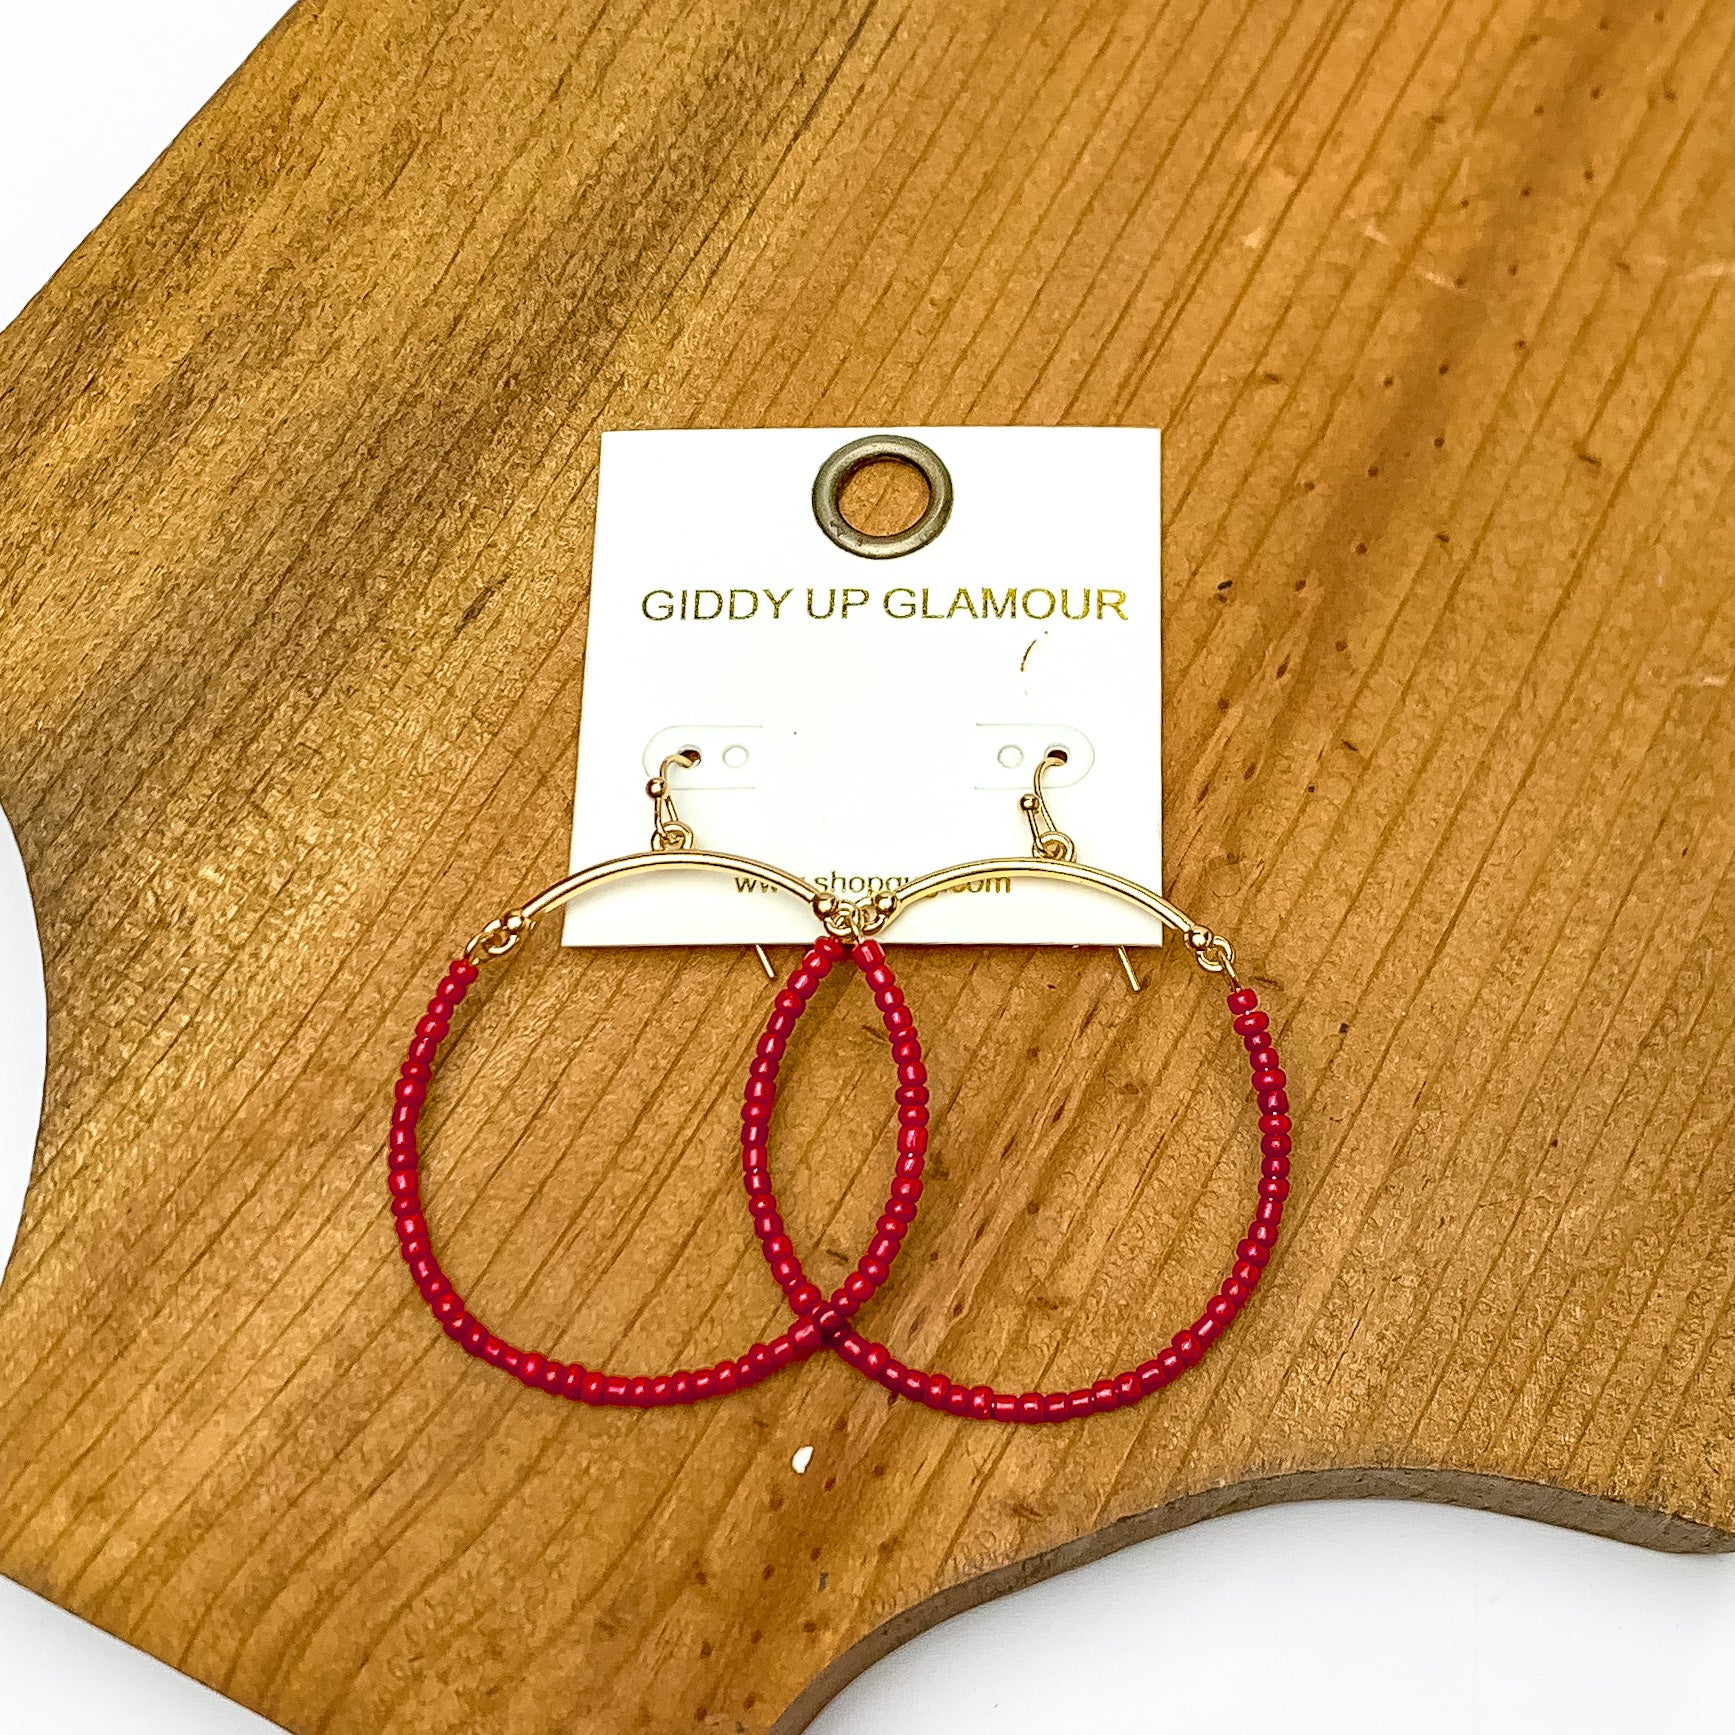 Gold Tone Hoop Earrings Beaded in Maroon. Pictured on a piece of wood.